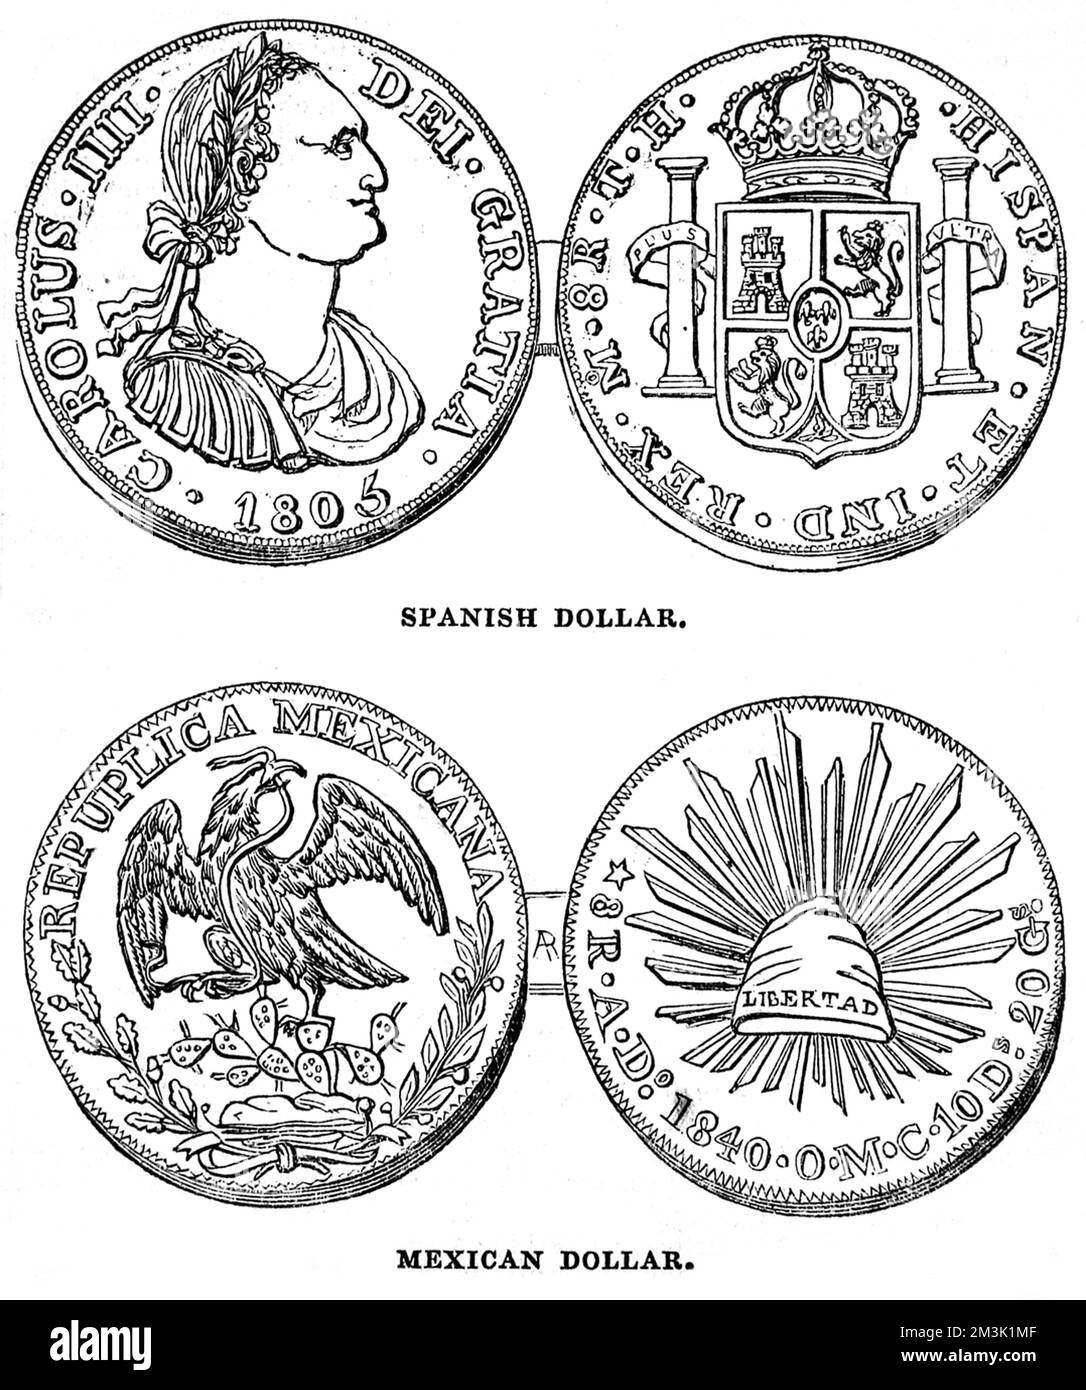 Coin held in the Bank of England's vaults. Early nineteenth centure Spanish and Mexican dollars, the spanish is known as the pillar dollar of Charles IV, the mexican is known as the eagle dollar.  1845 Stock Photo